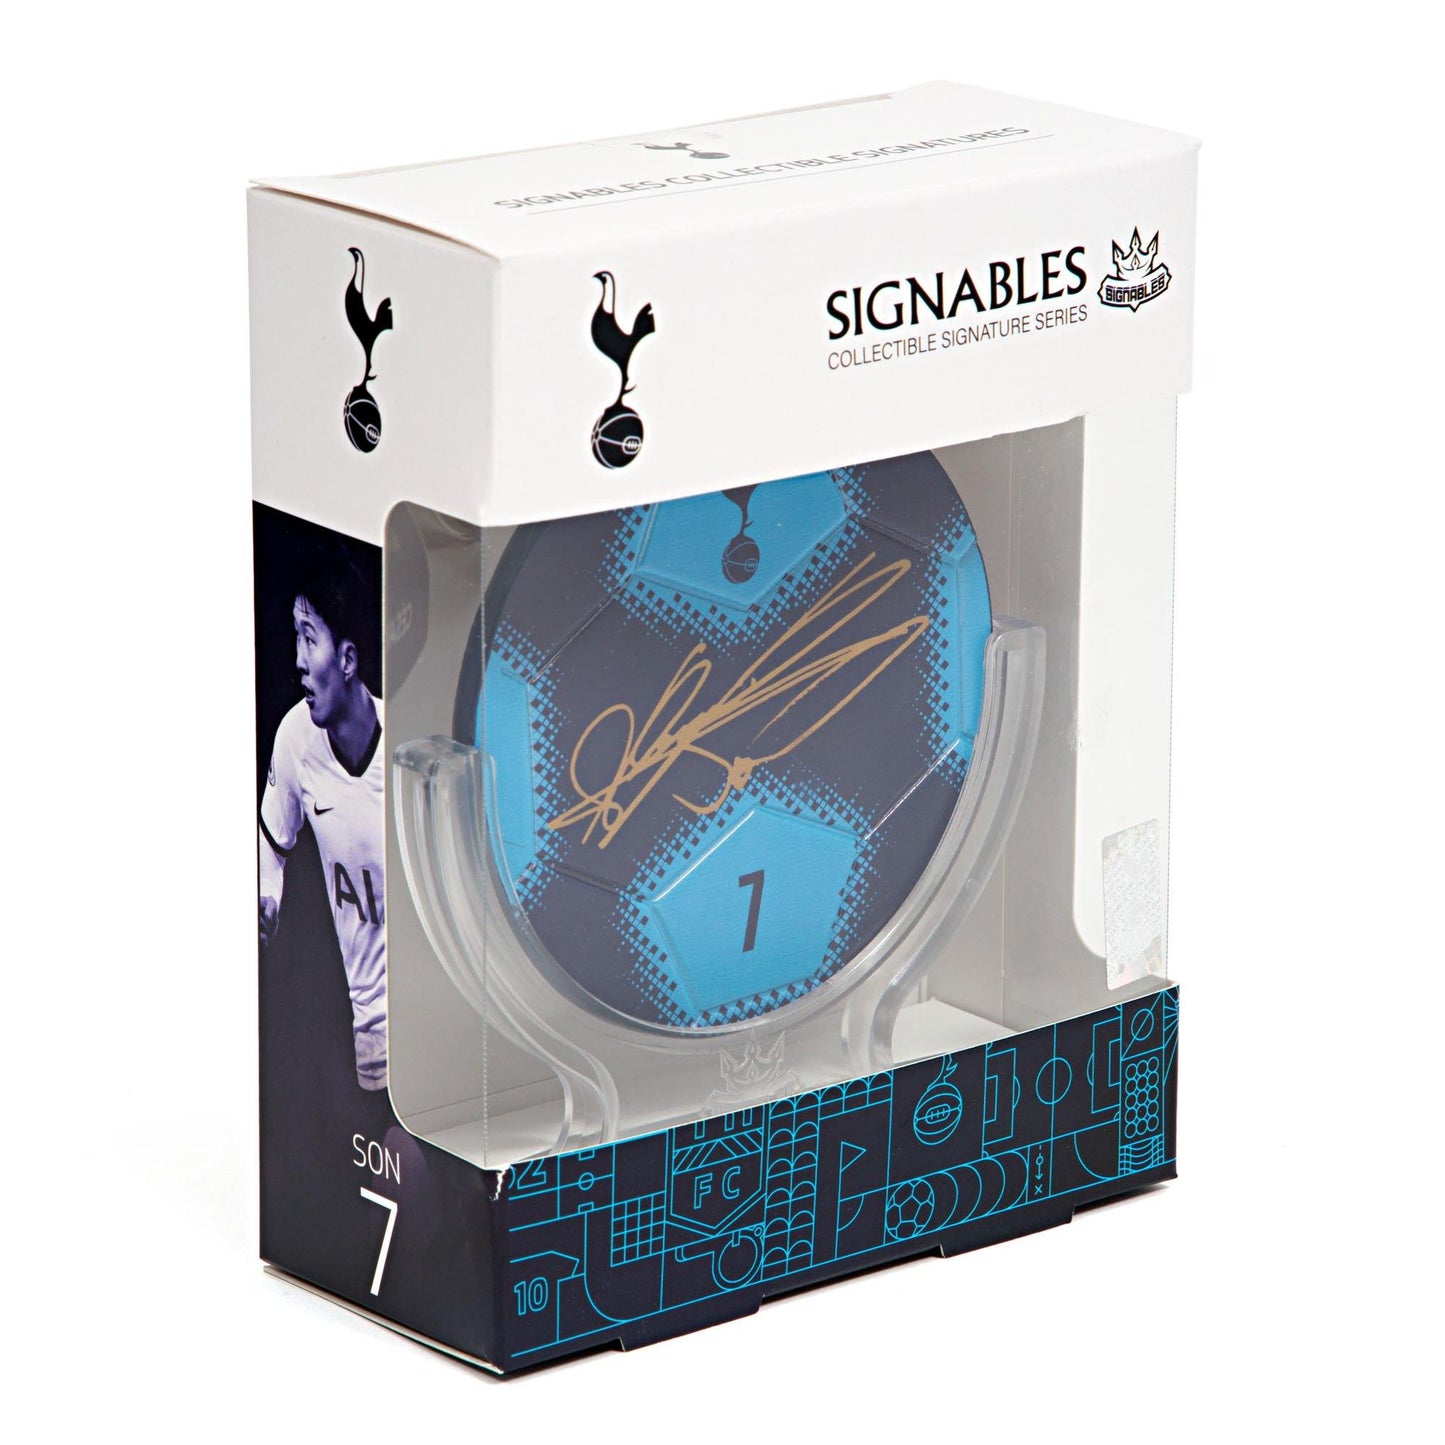 Heung-Min Son - Tottenham Hotspur F.C. Signables Collectible Box Side